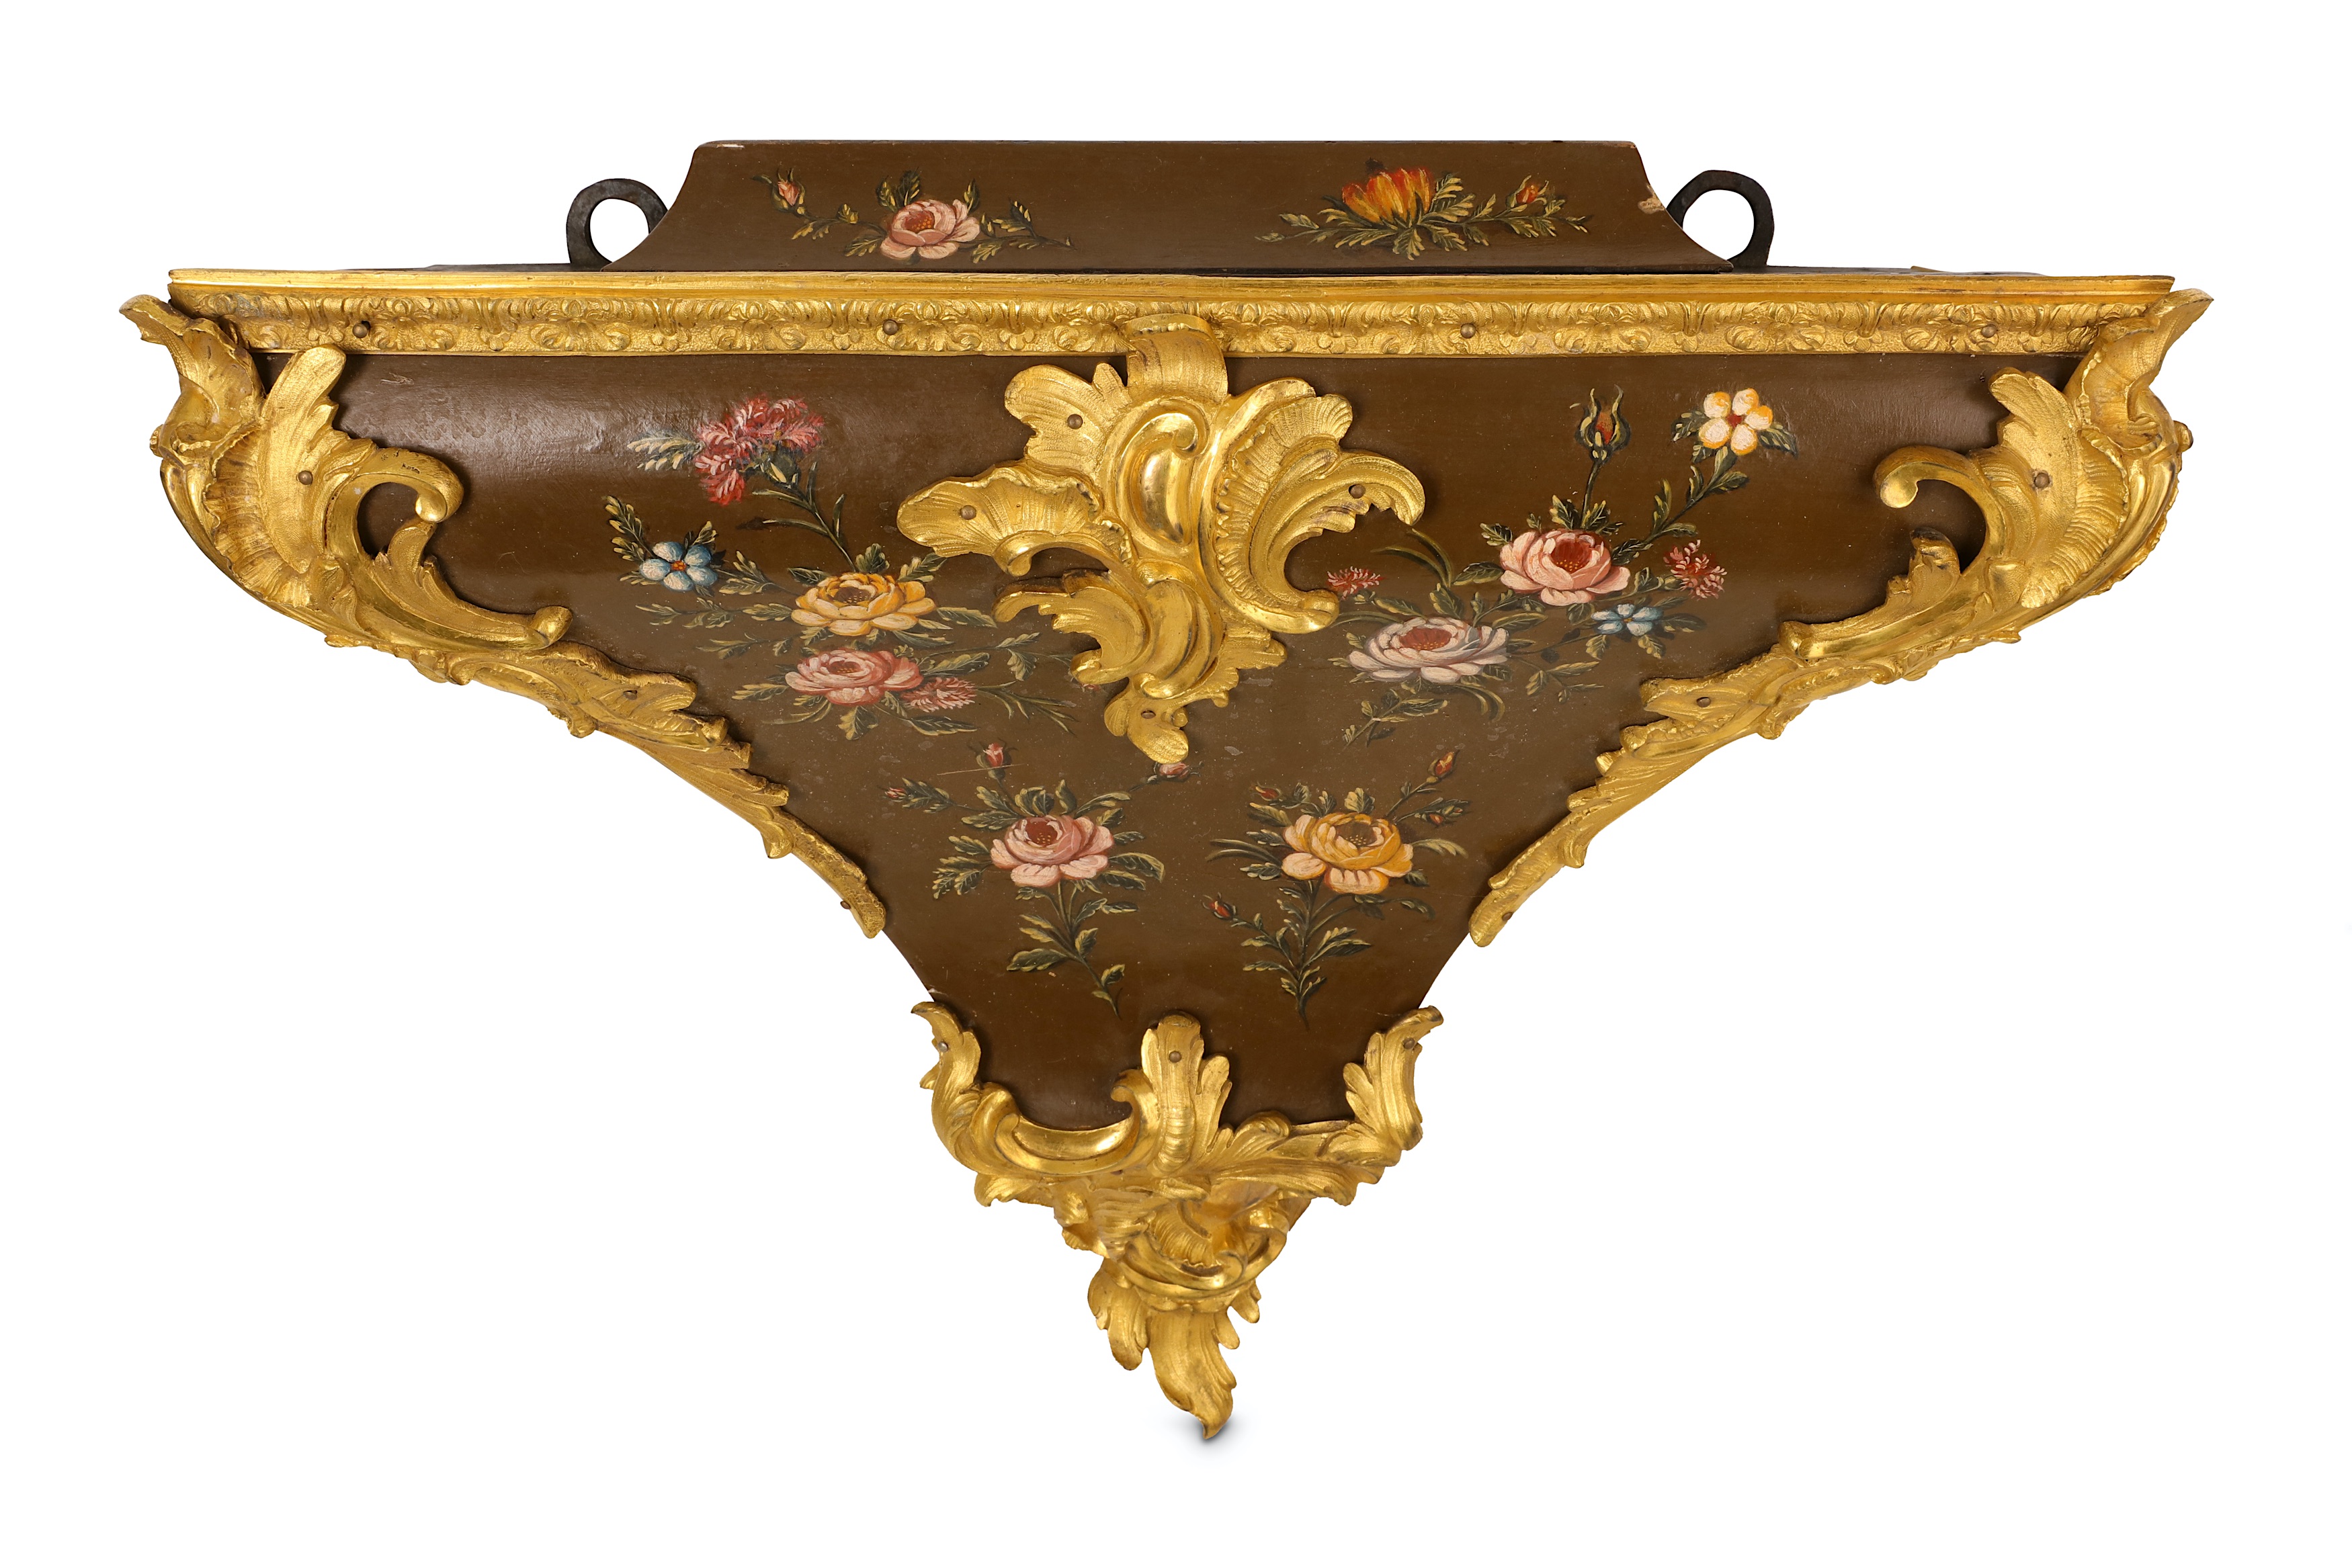 A LARGE 18TH CENTURY FRENCH LOUIS XV PERIOD PAINTED AND GILT BRONZE MOUNTED BRACKET CLOCK SIGNED - Image 6 of 7